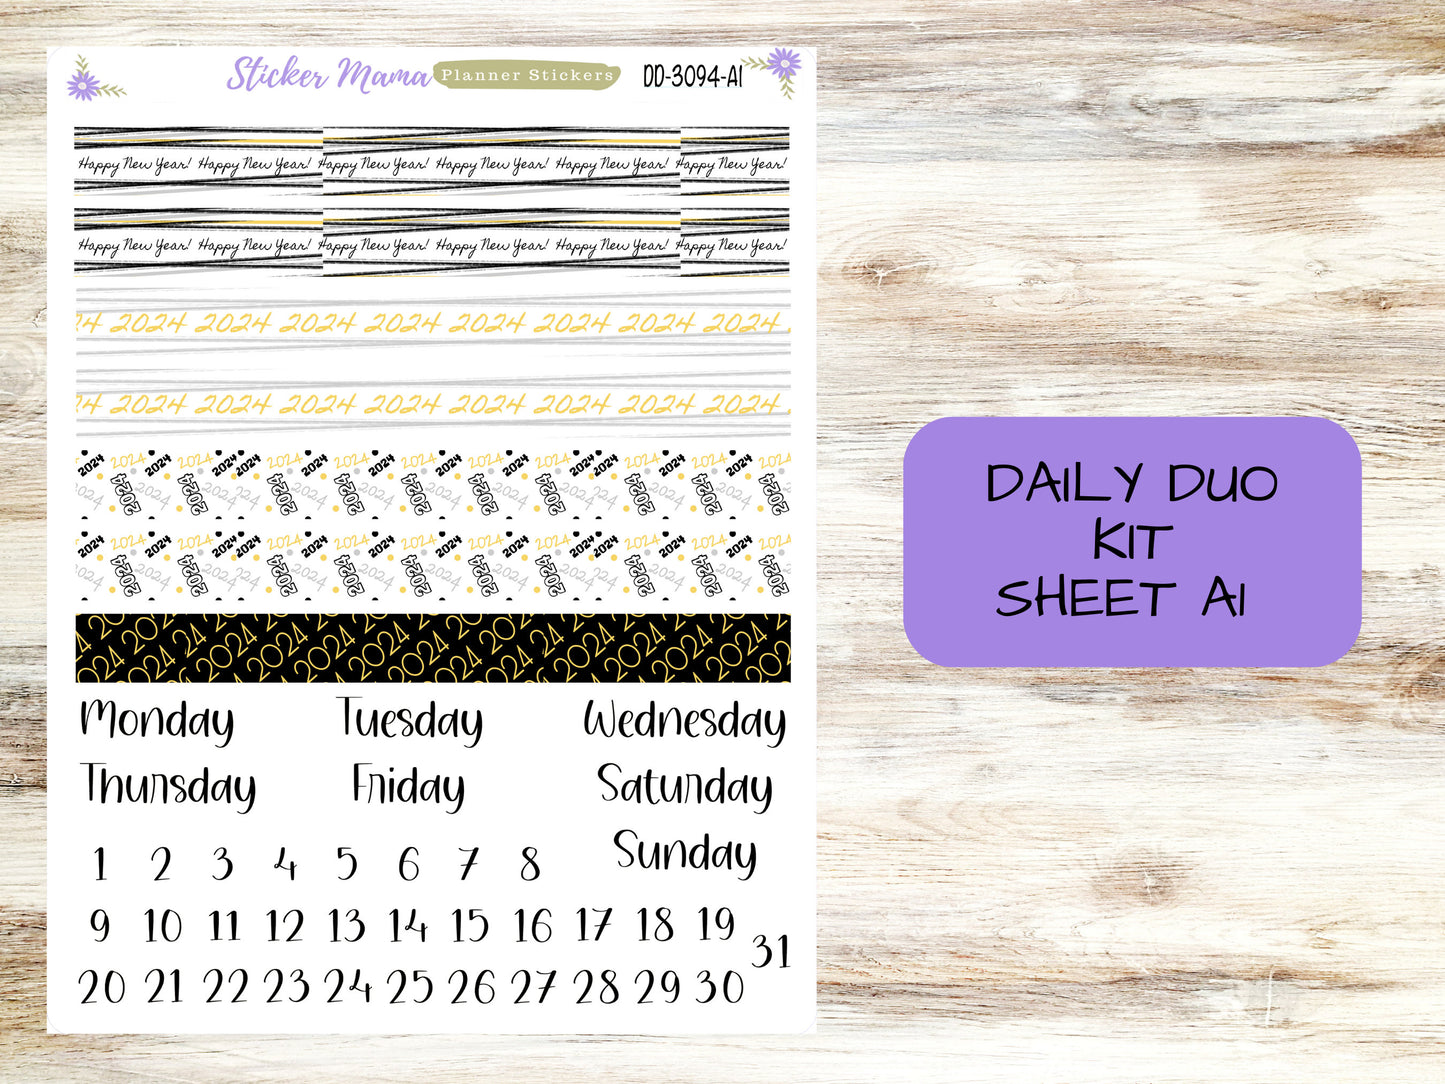 DD3094 - Daily Duo 7x9 || HAPPY NEW Year Planner Stickers - Daily Duo 7x9 Planner - Daily Duo Stickers - Daily Planner